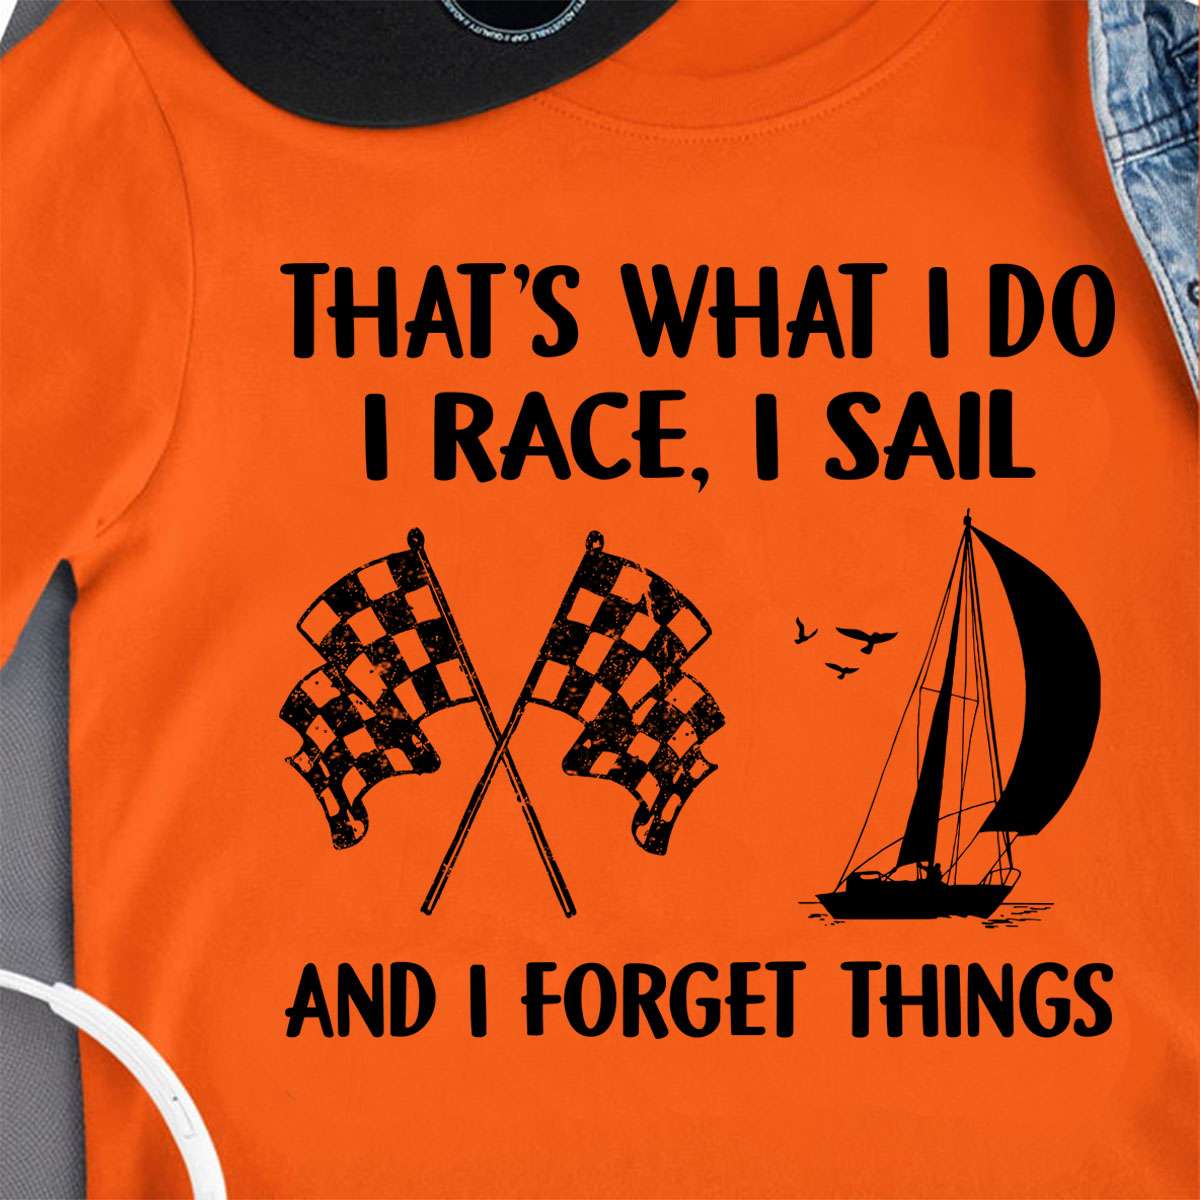 That's what I do I race, I sail and I forget things - Racing and sailing, racing flag